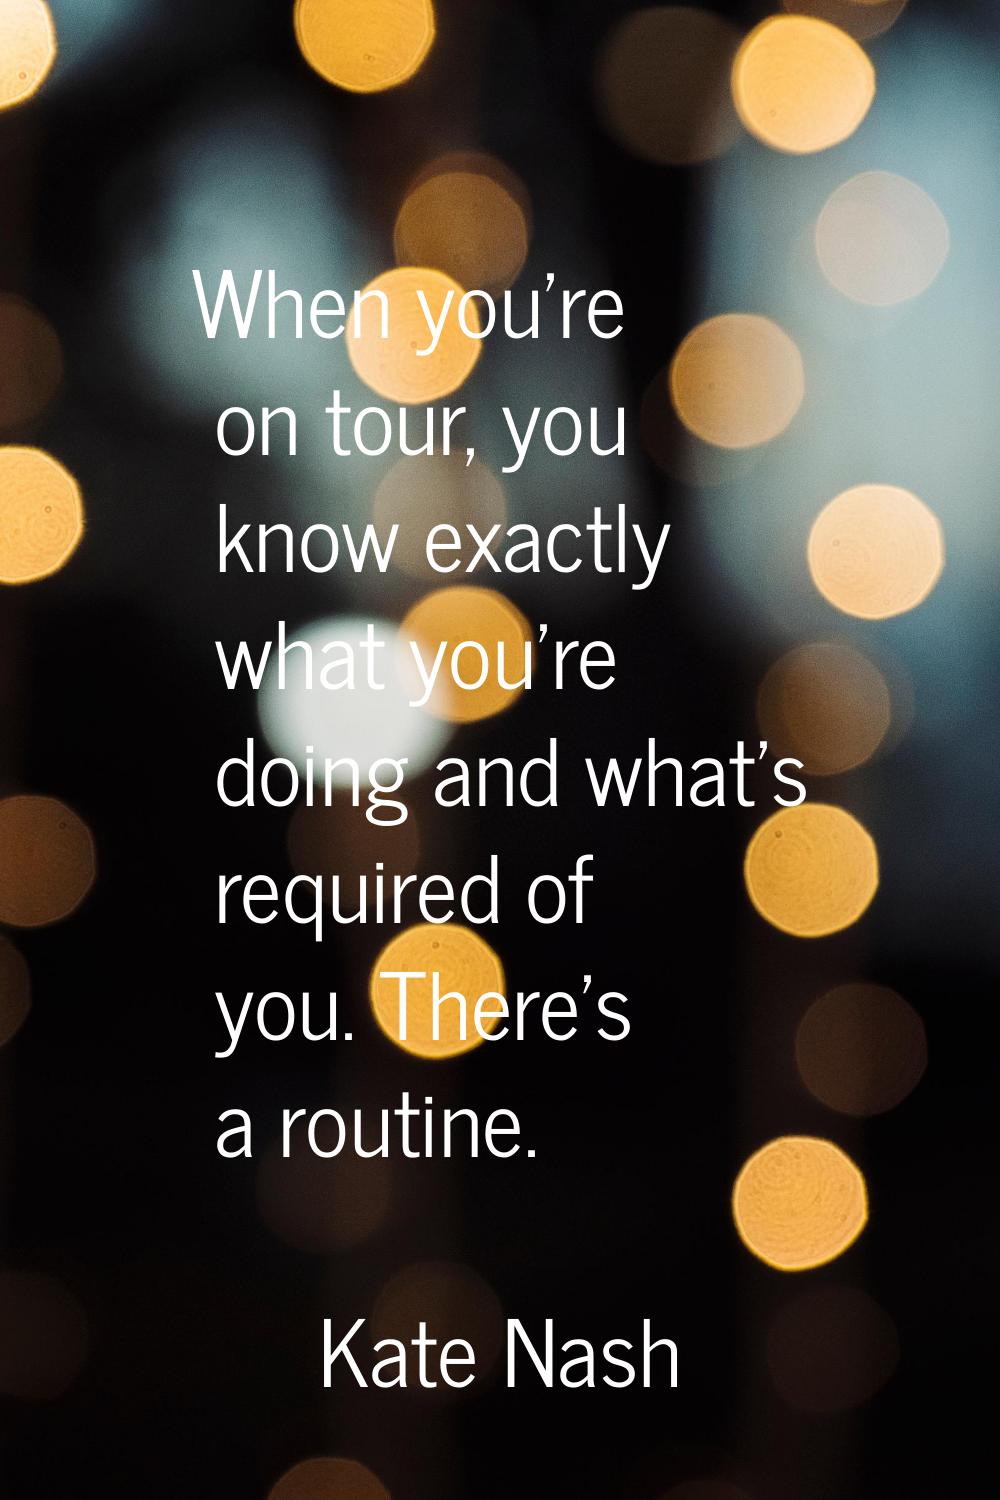 When you're on tour, you know exactly what you're doing and what's required of you. There's a routi